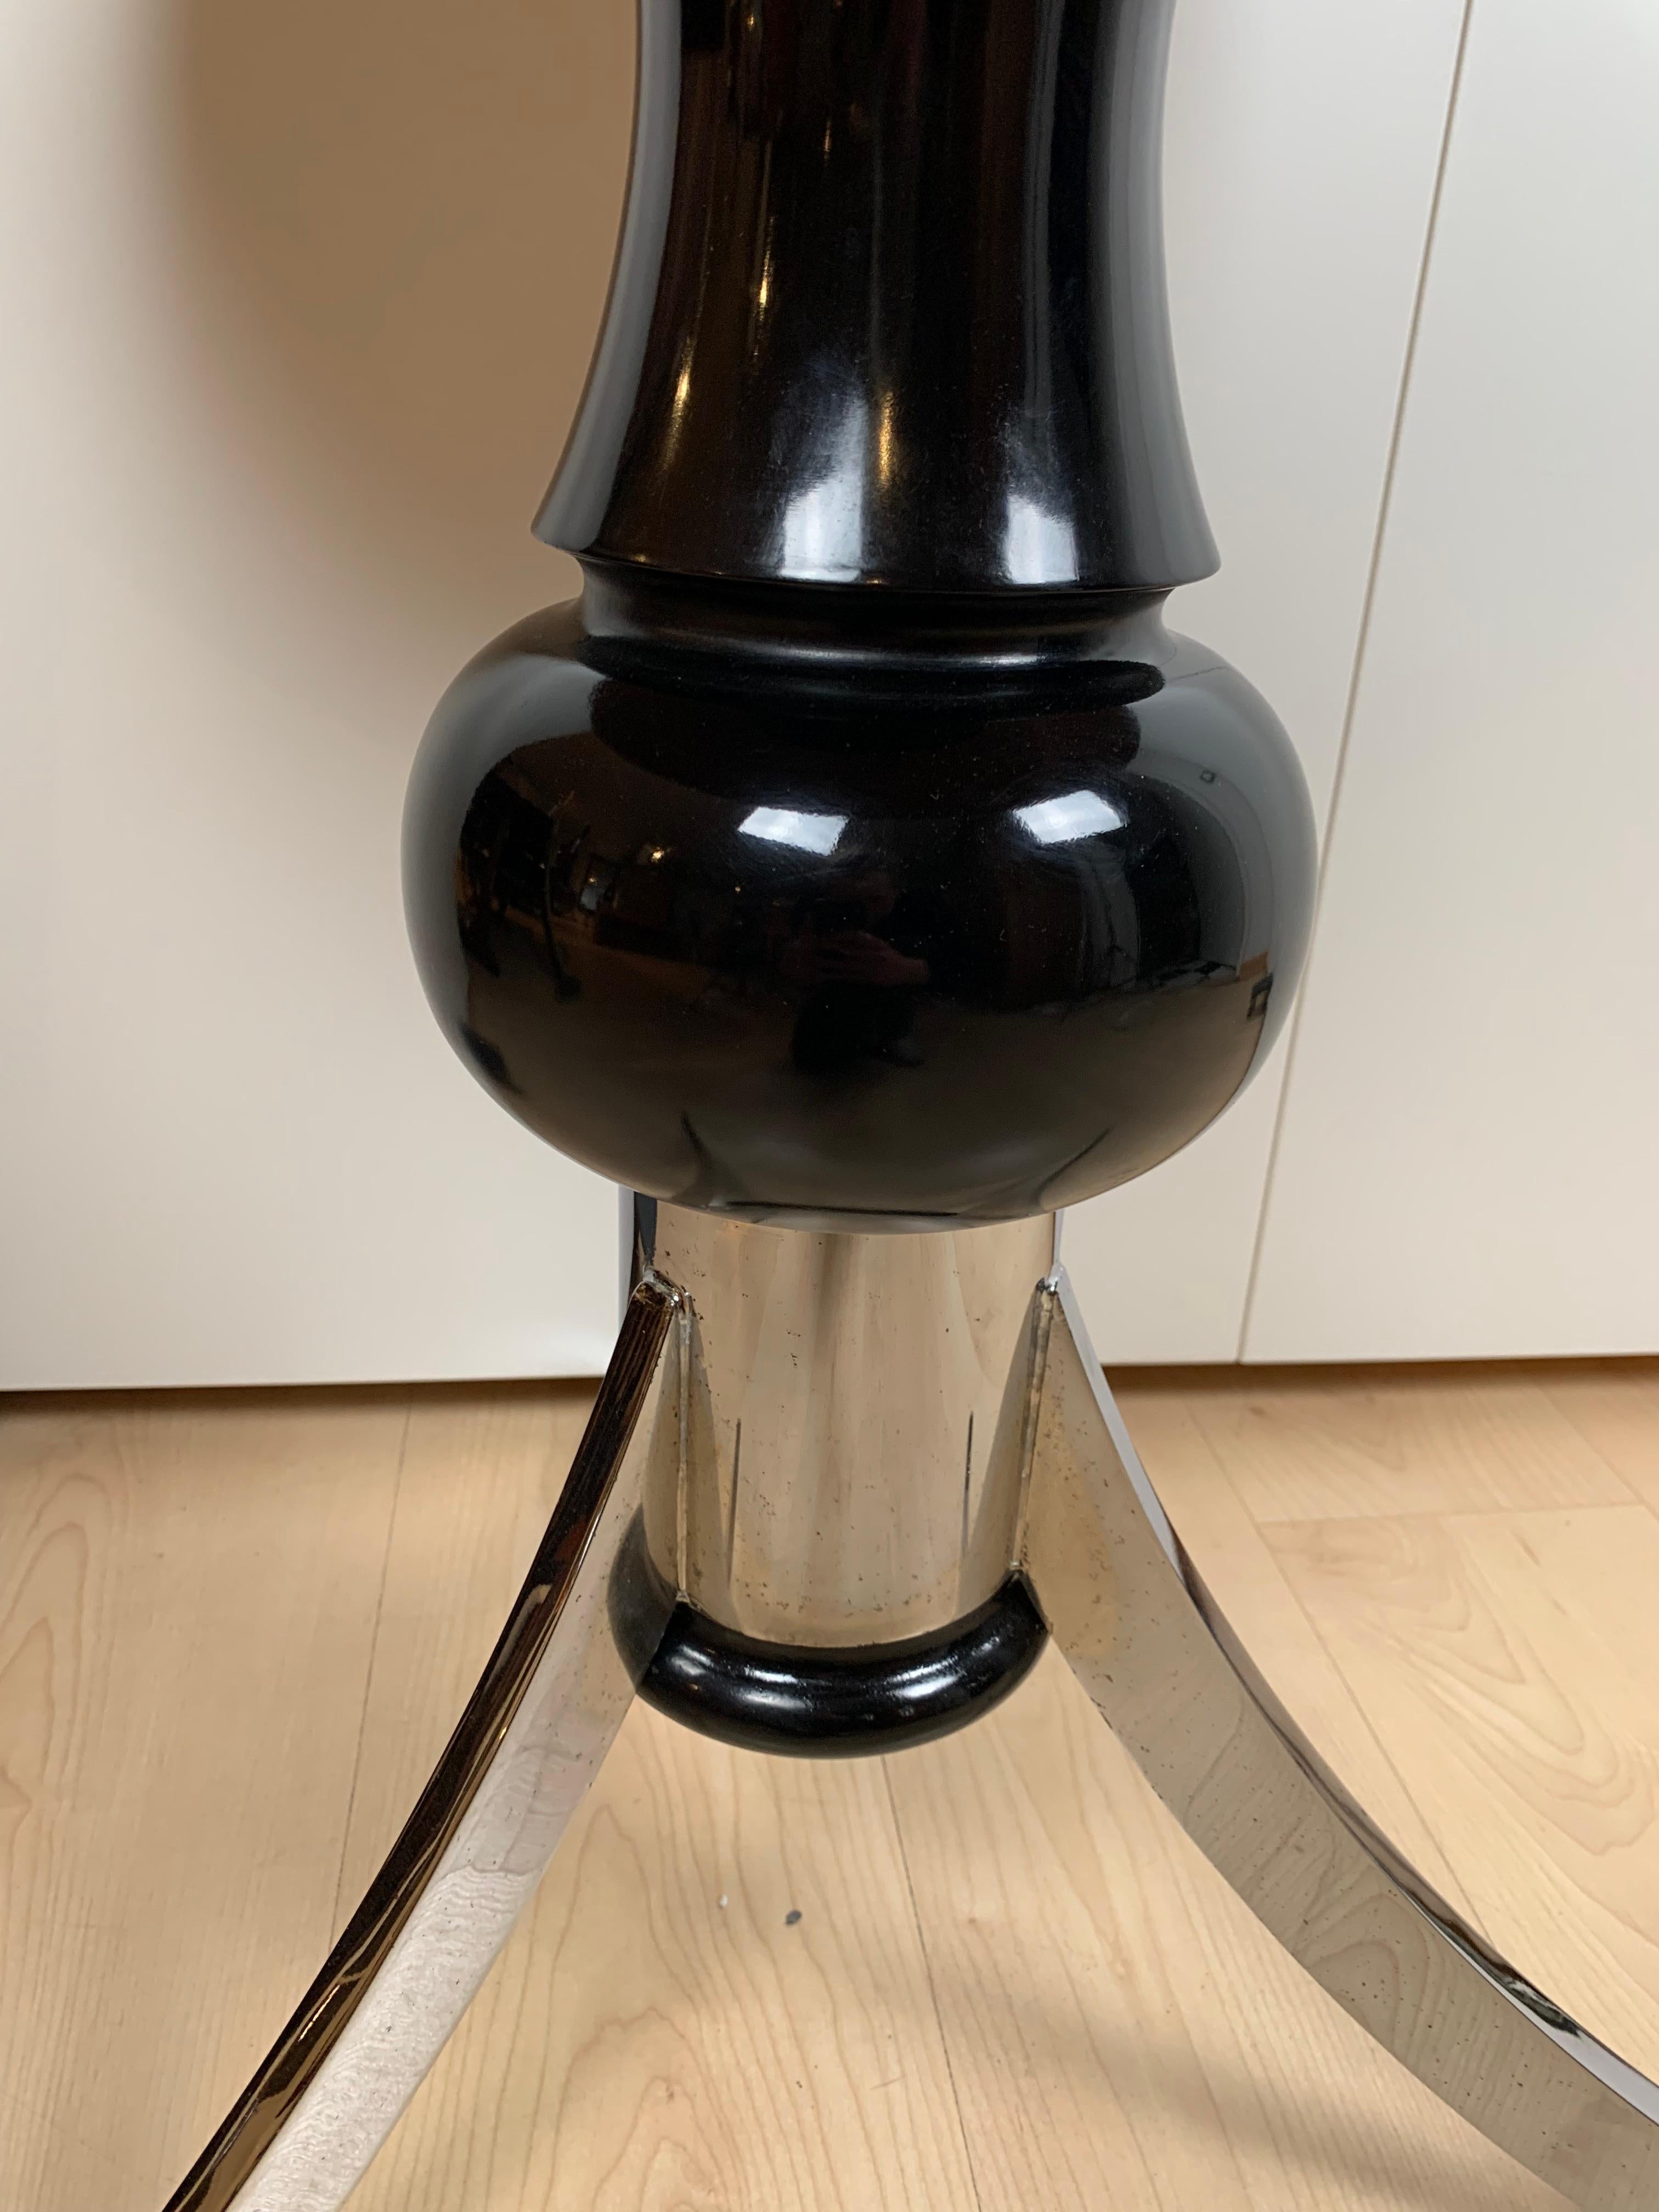 Mid-20th Century Art Deco Side Table, Black Lacquer and Chrome, France, circa 1930